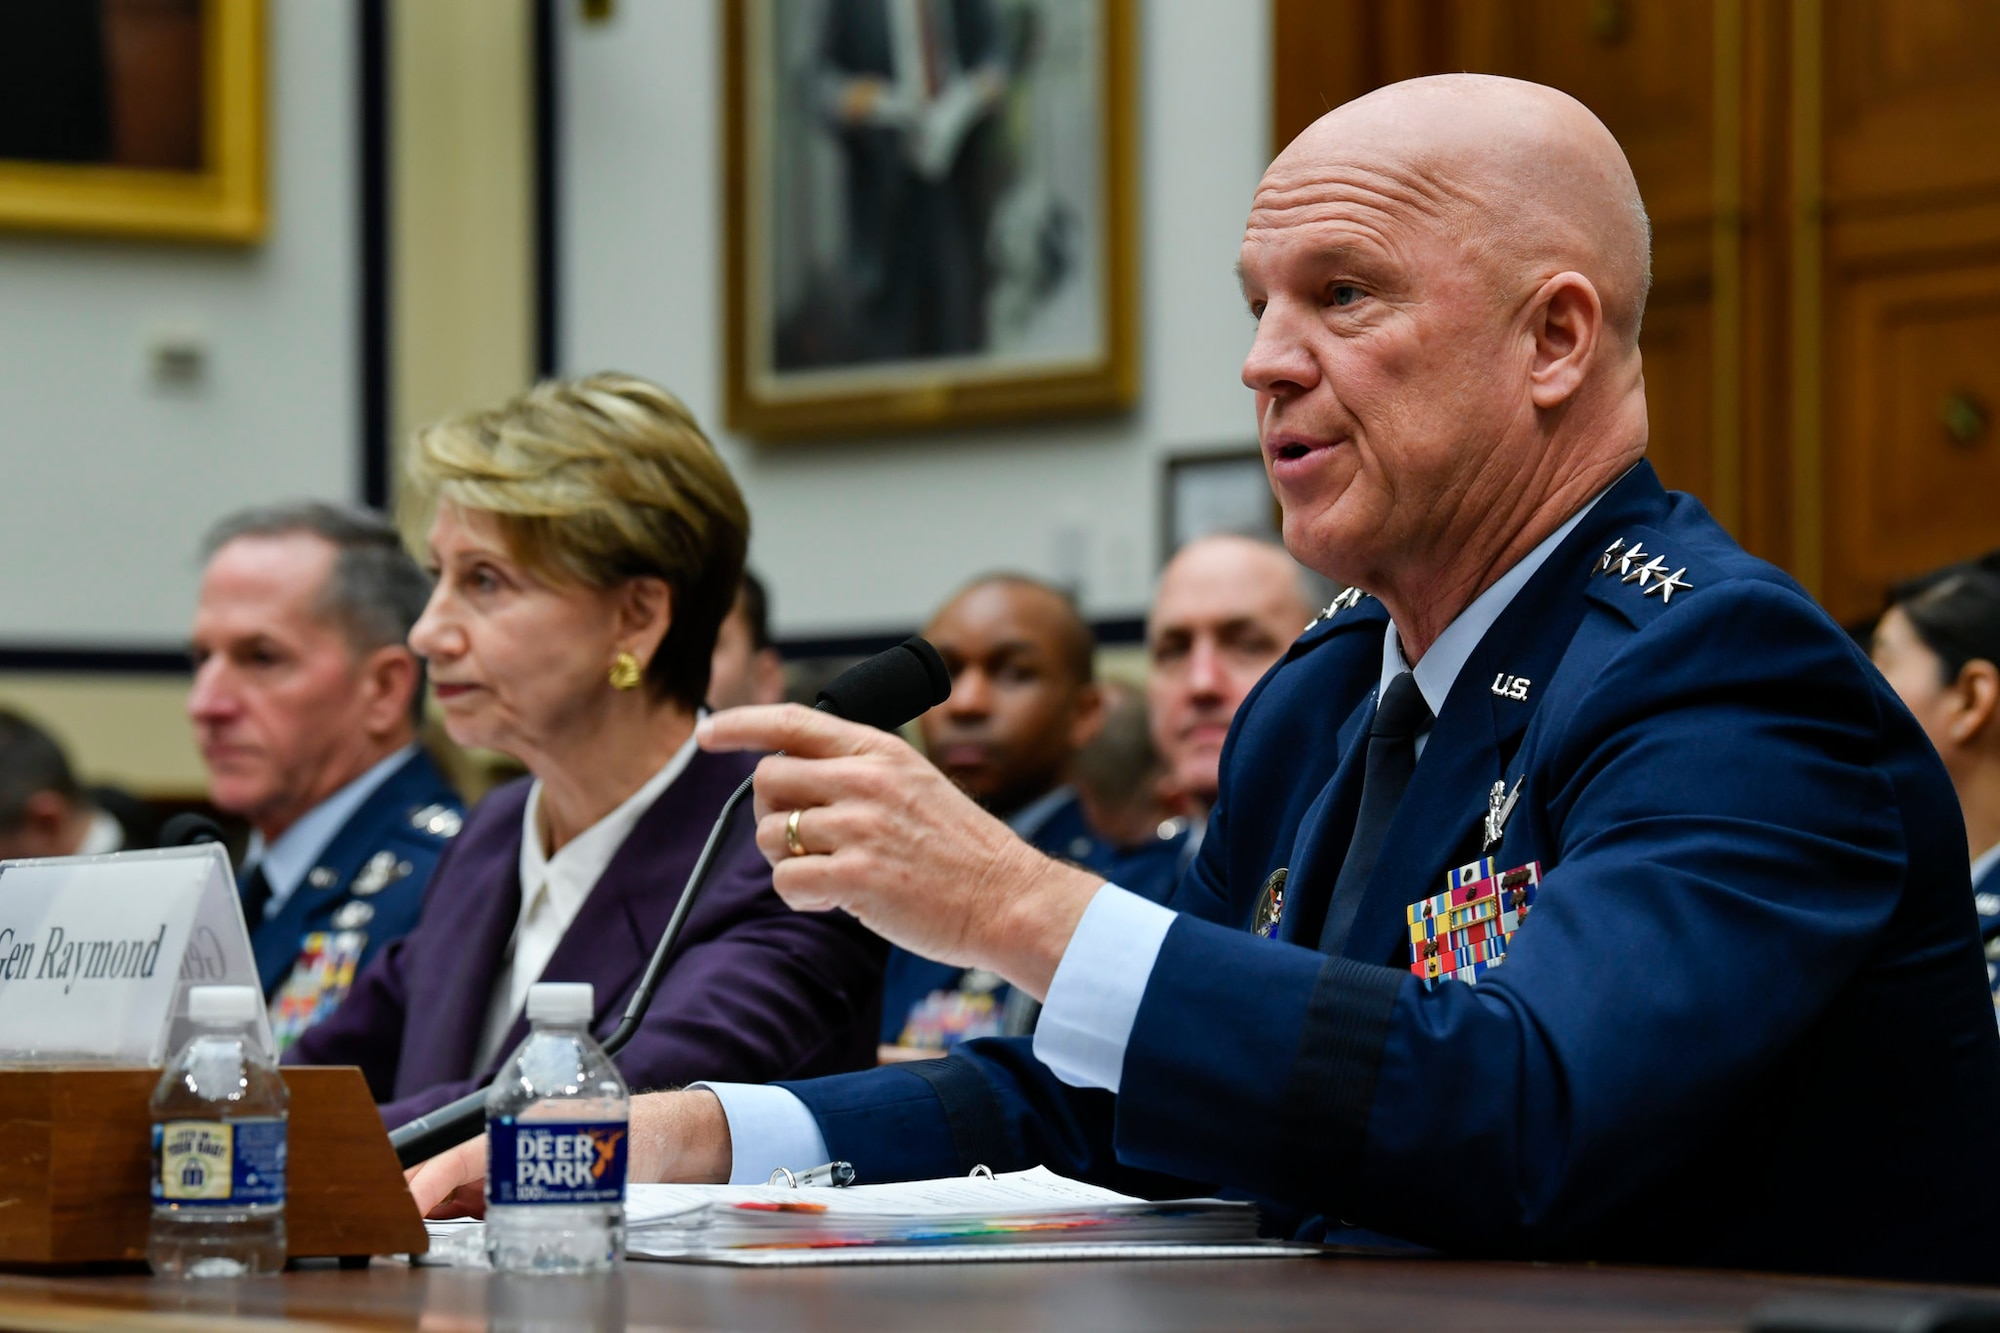 Chief of Space Operations Gen. John W. Raymond testifies before the House Armed Services Committee in Washington, D.C., March 4, 2020. (U.S. Air Force photo by Wayne Clark)